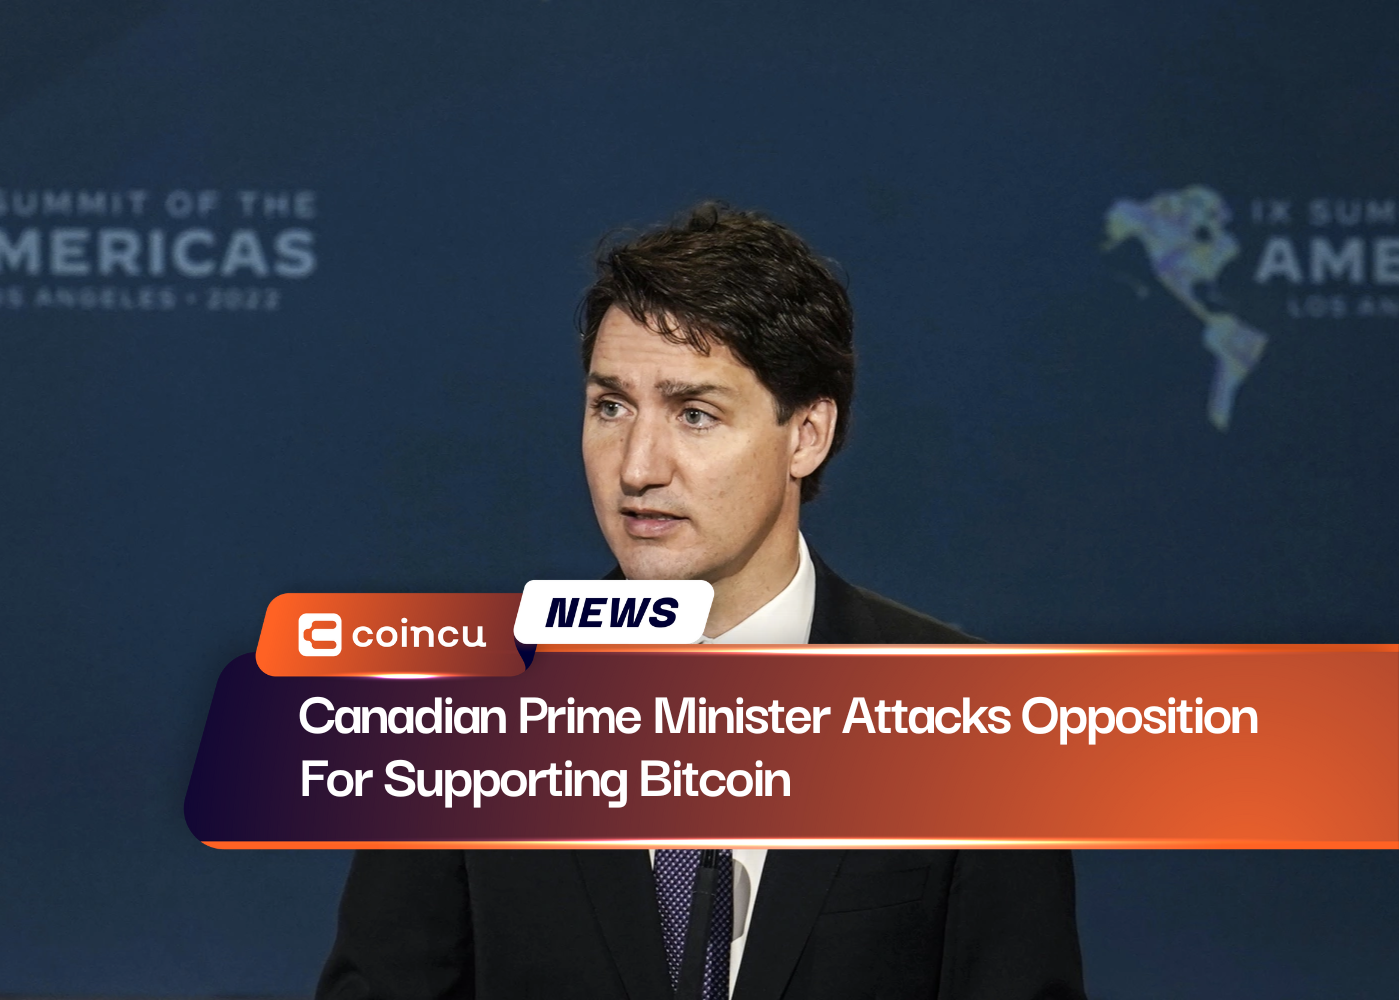 Canadian Prime Minister Attacks Opposition For Supporting Bitcoin